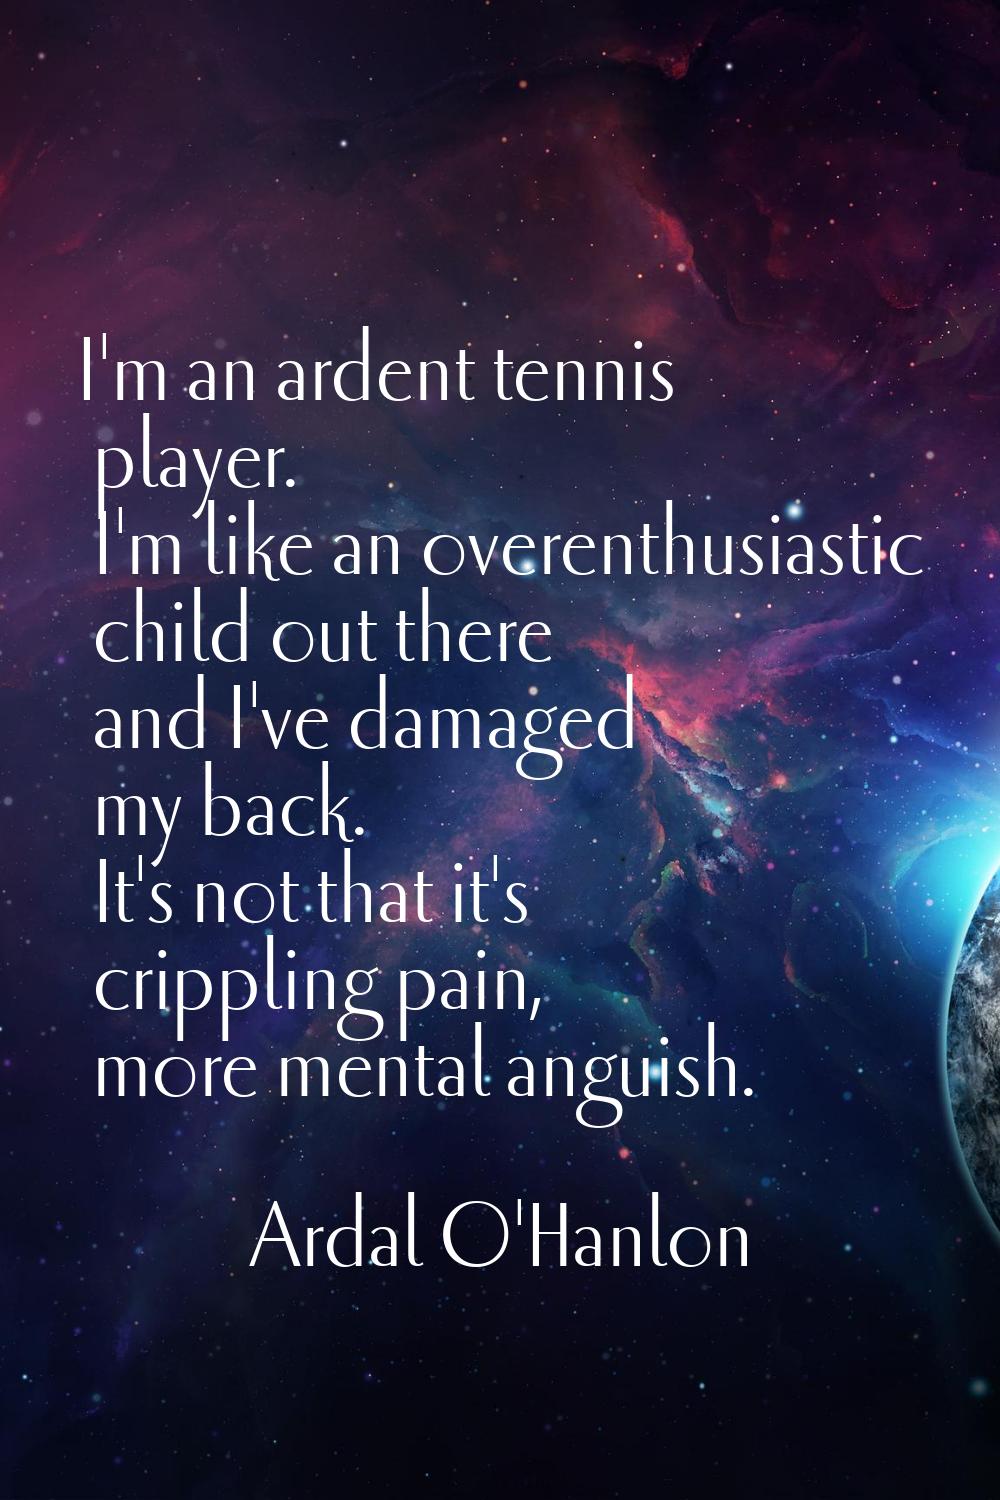 I'm an ardent tennis player. I'm like an overenthusiastic child out there and I've damaged my back.